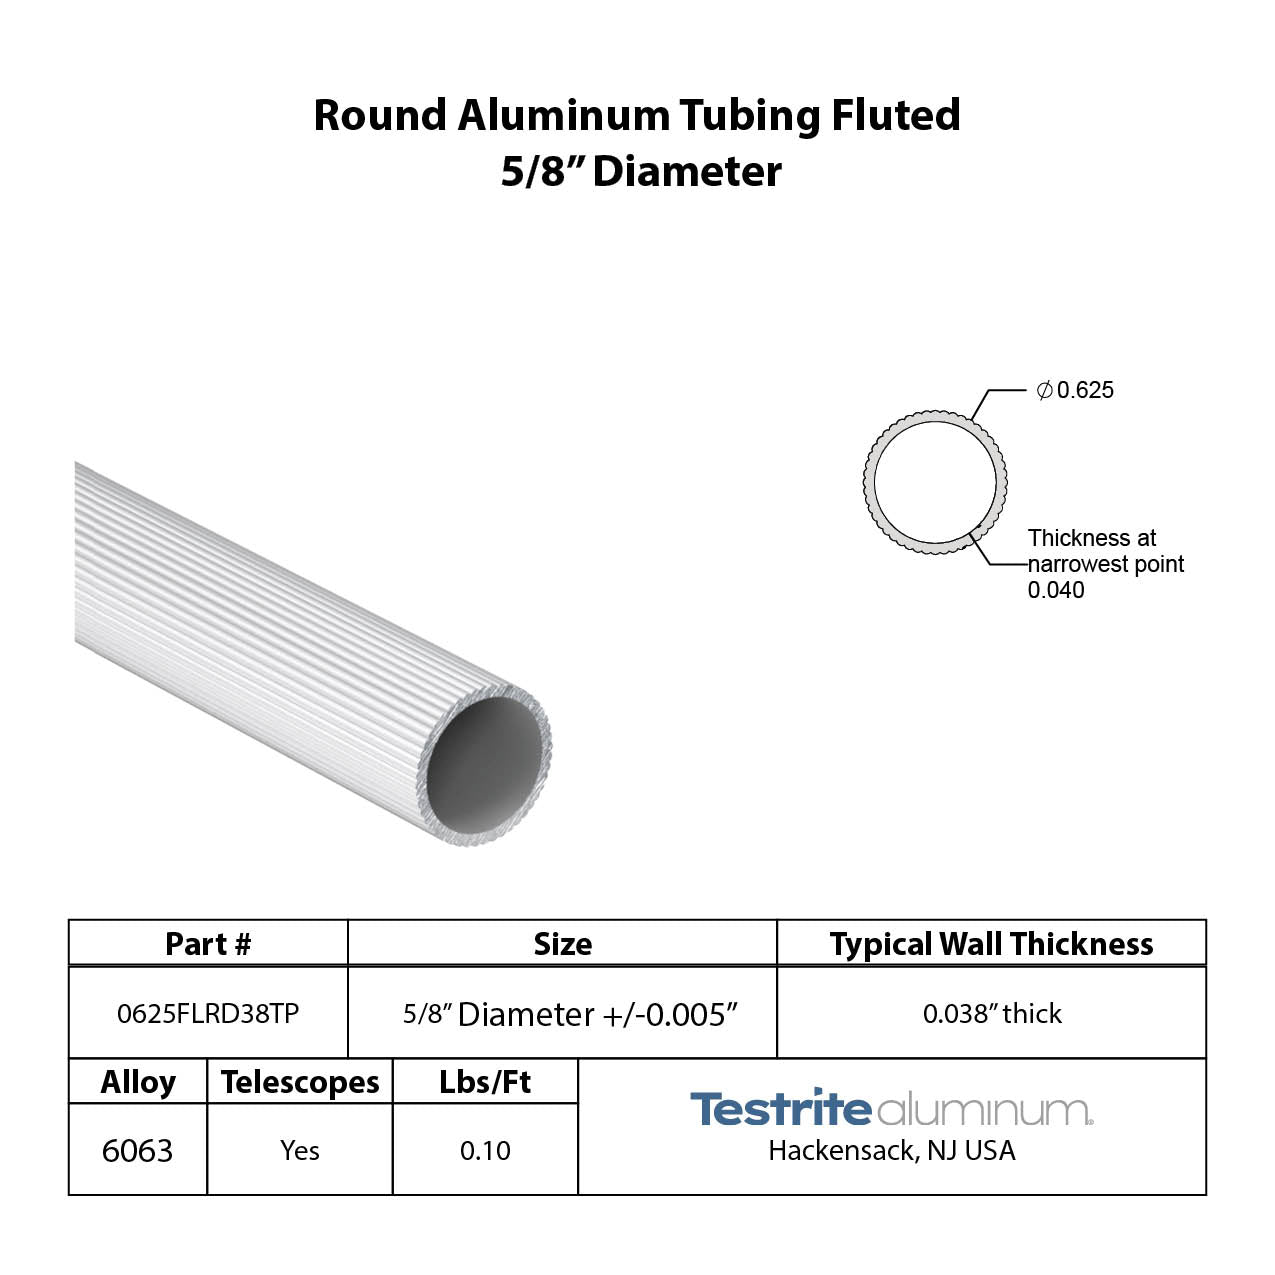 5/8" Round aluminum tube fluted, fluted 0.625" aluminum tube with ribs ridges .038" wall similar to .035" wall. Standard tolerances apply